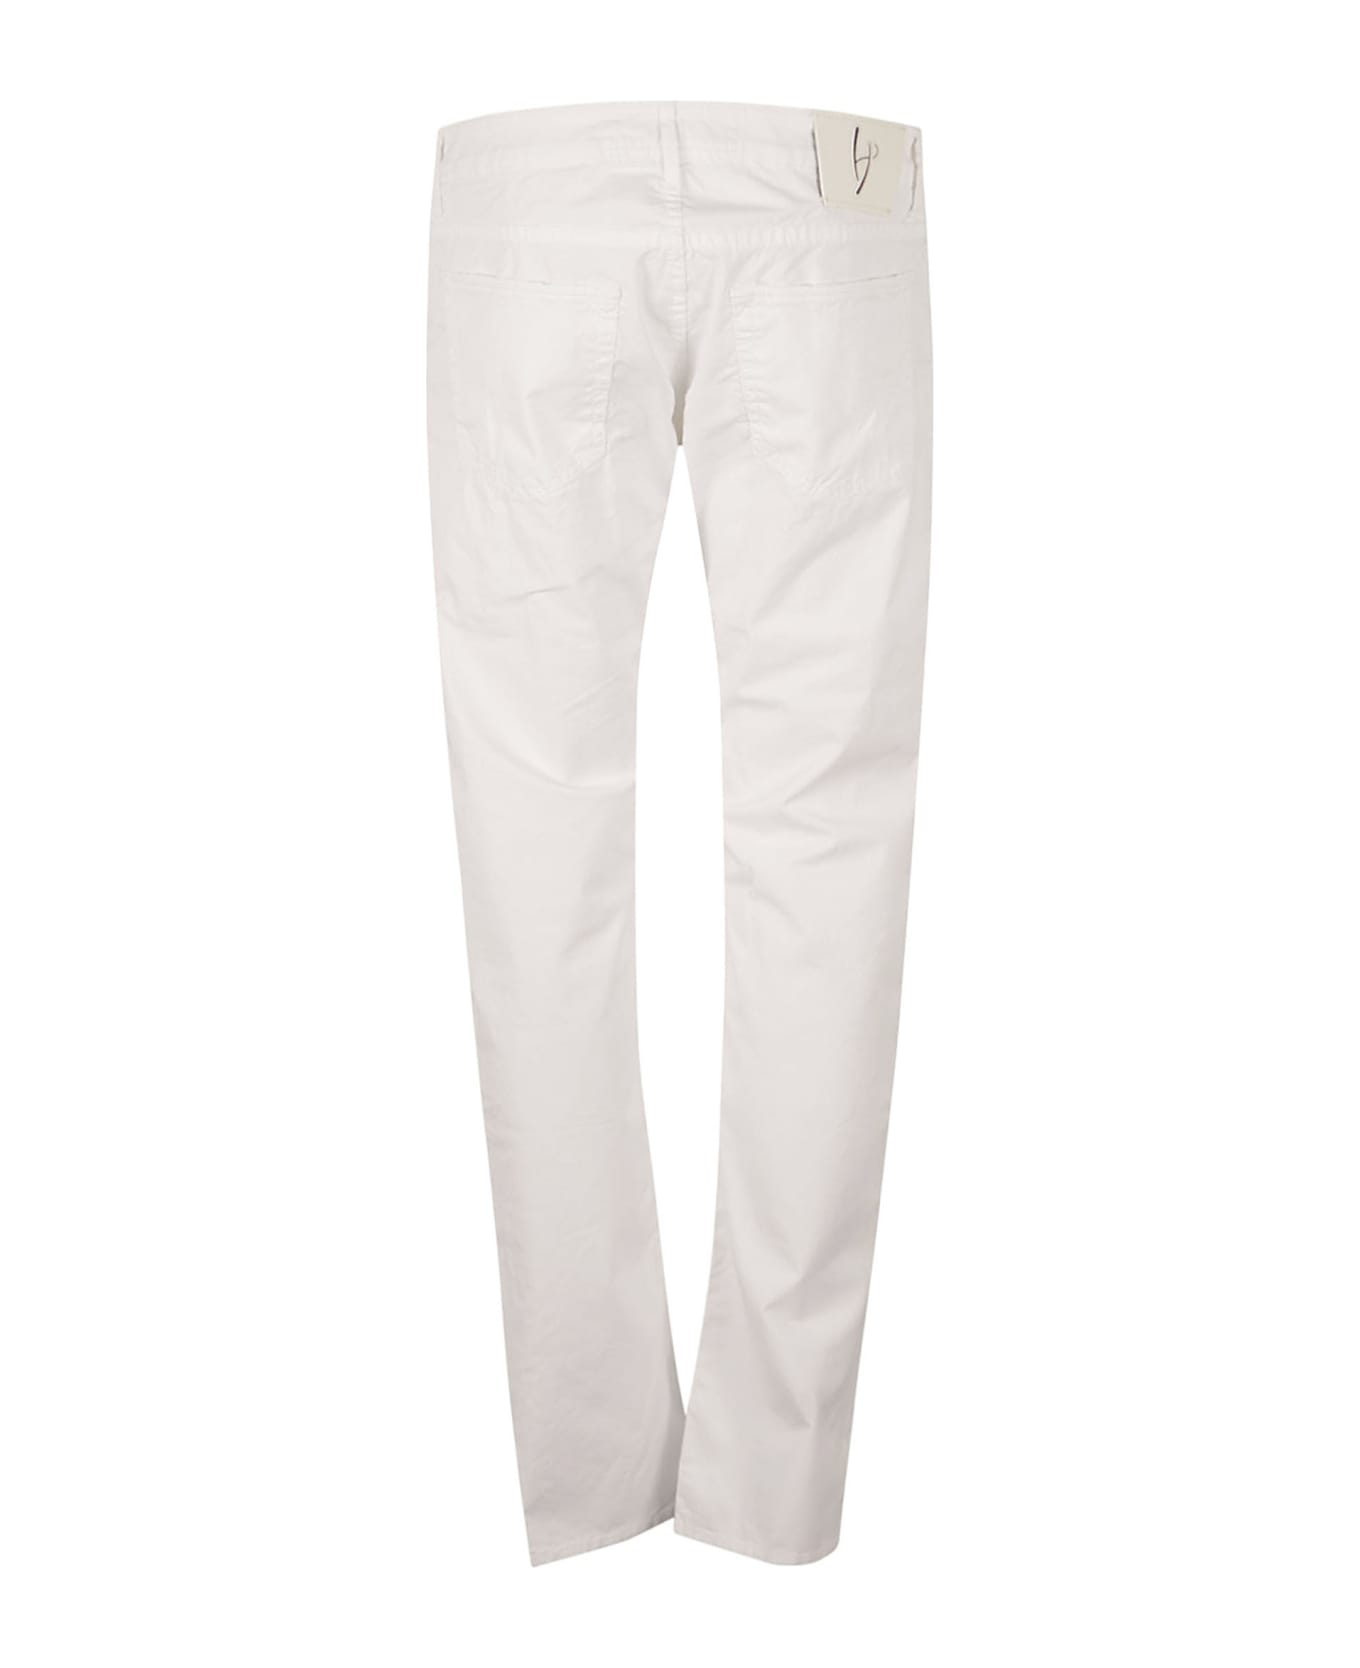 Hand Picked Orvietoc Jeans - White